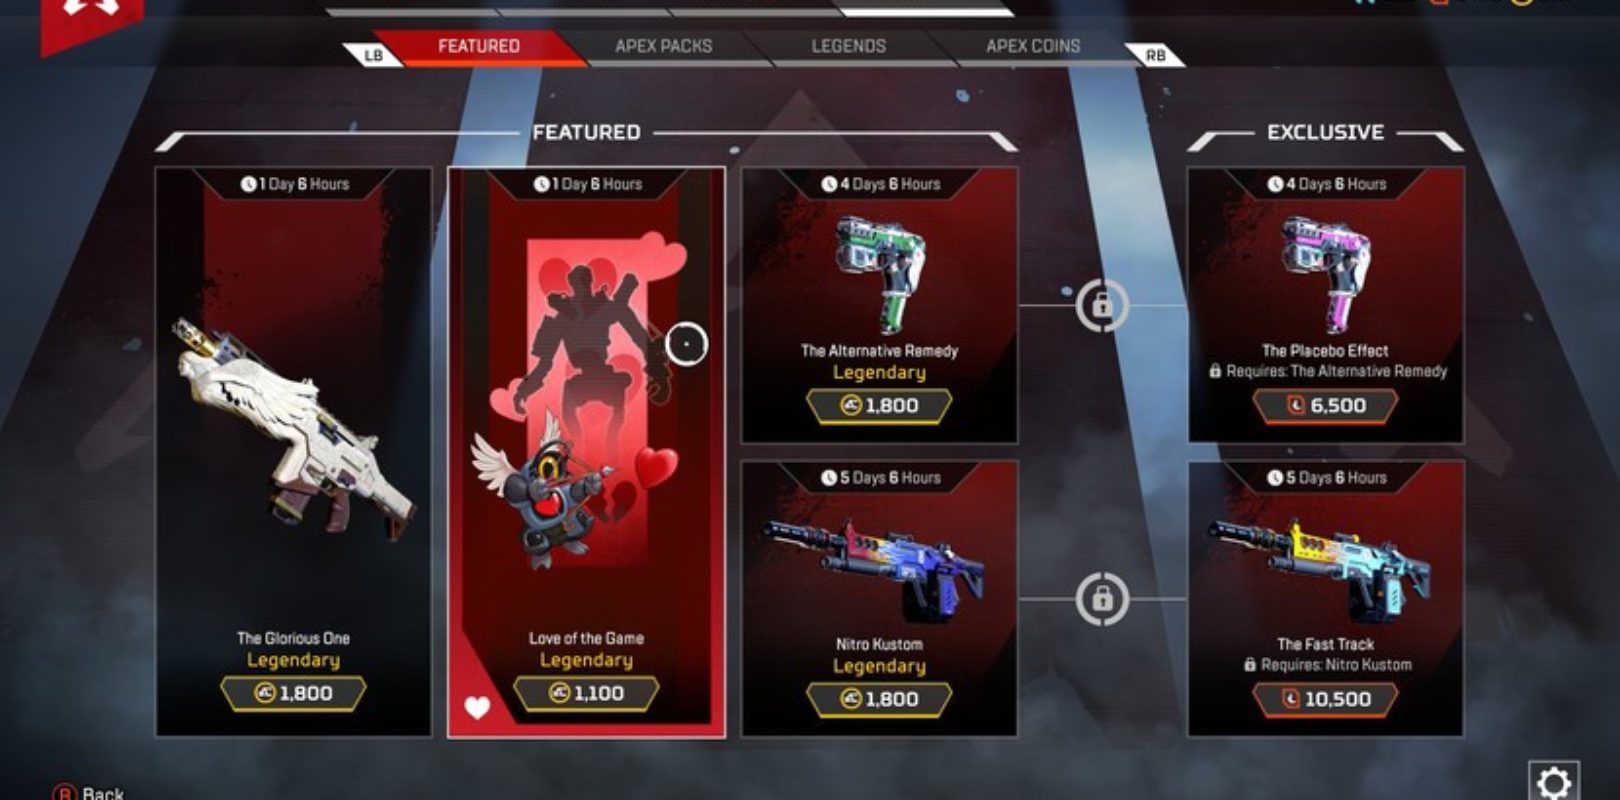 where to buy apex legends